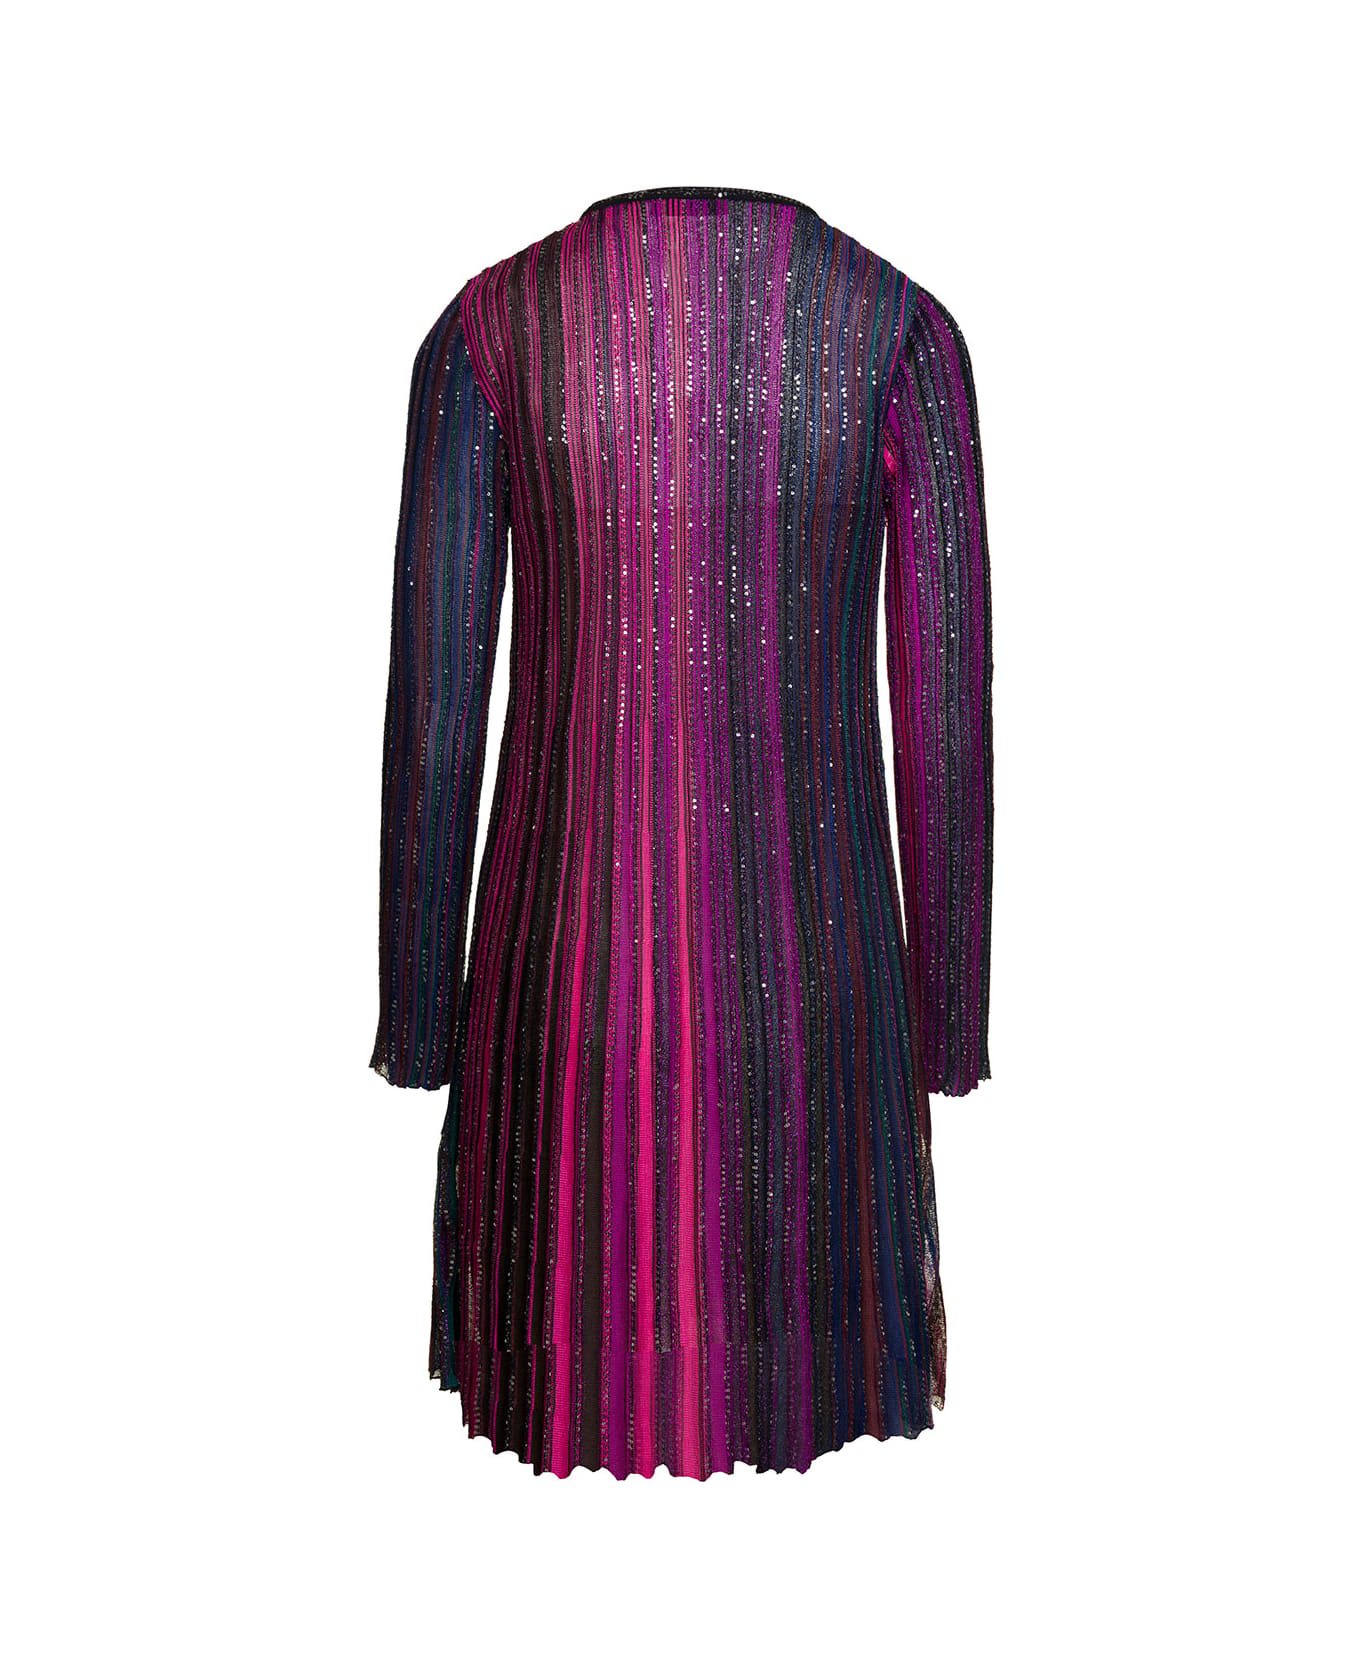 Missoni Multicolor Partialized Knit With Sequin Long Sleeves Mini Dress - N Black Viole